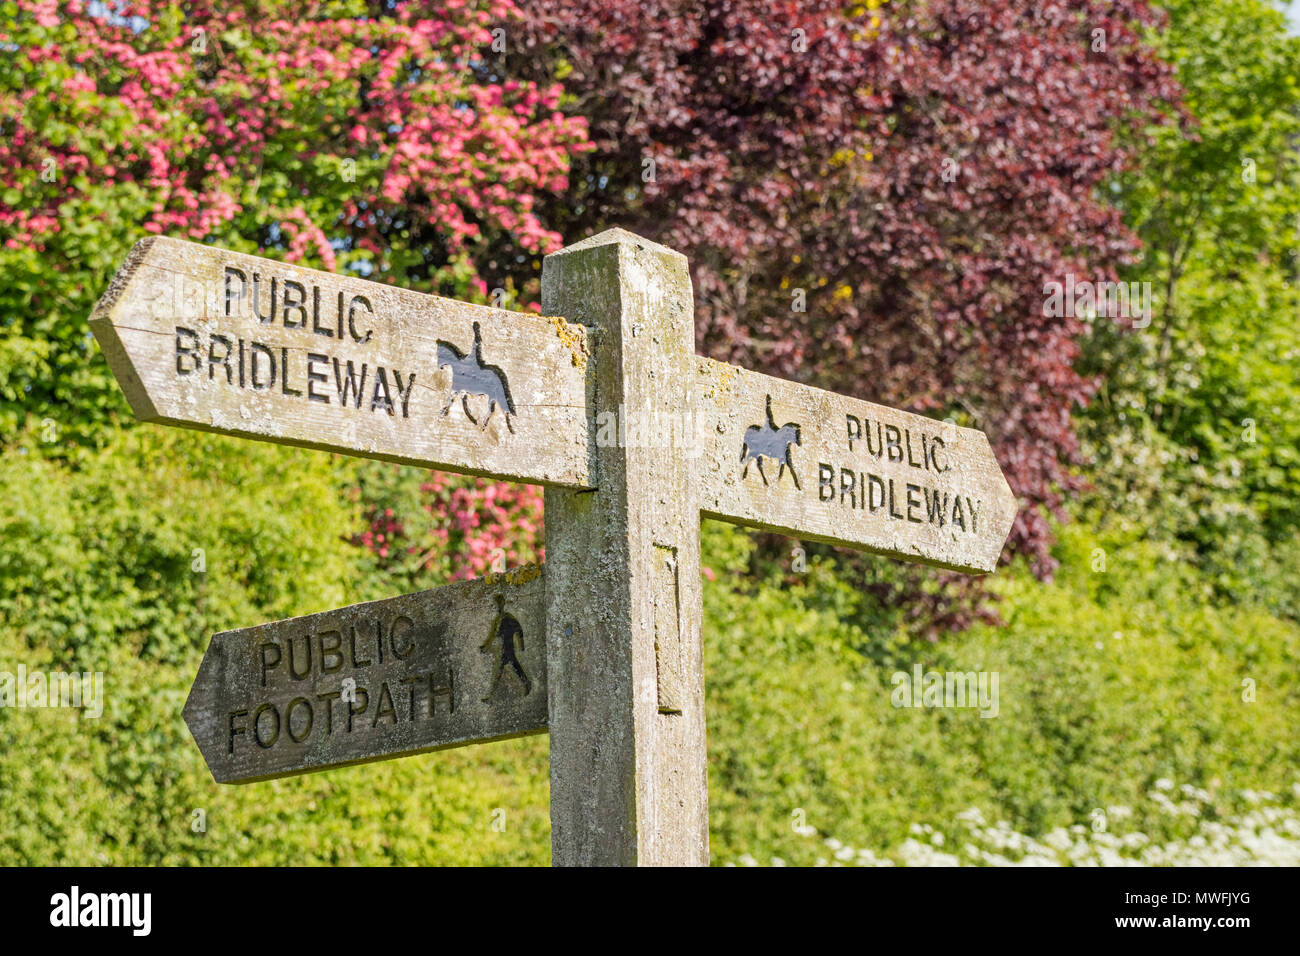 A public footpath and bridleway right of way sign, England, UK Stock Photo